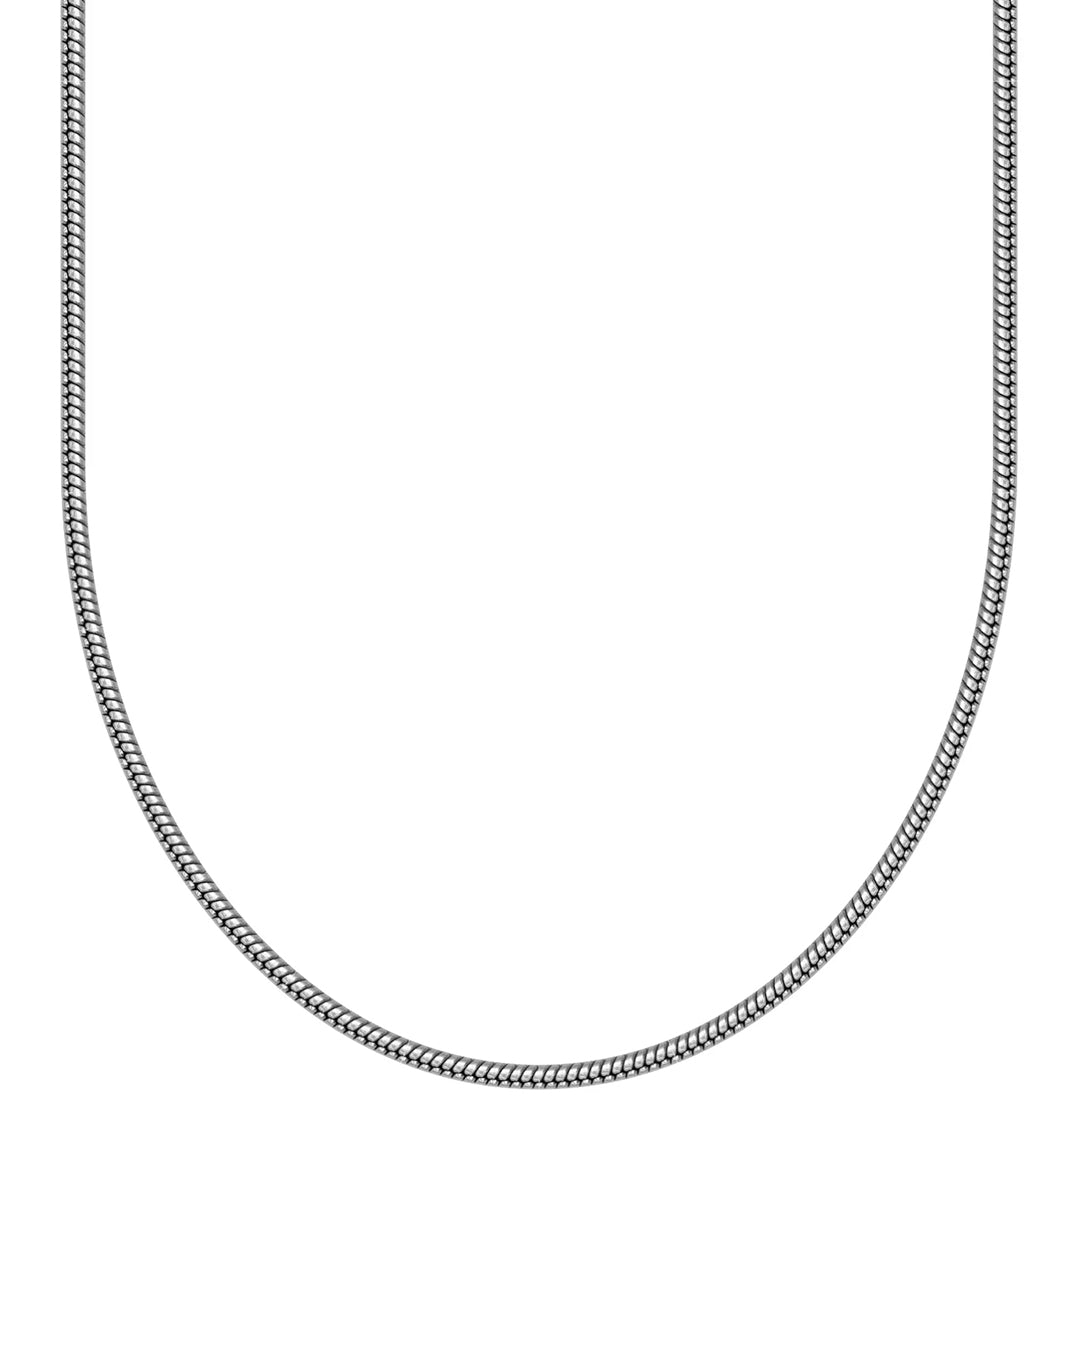 Snake Chain 2mm (Silver)